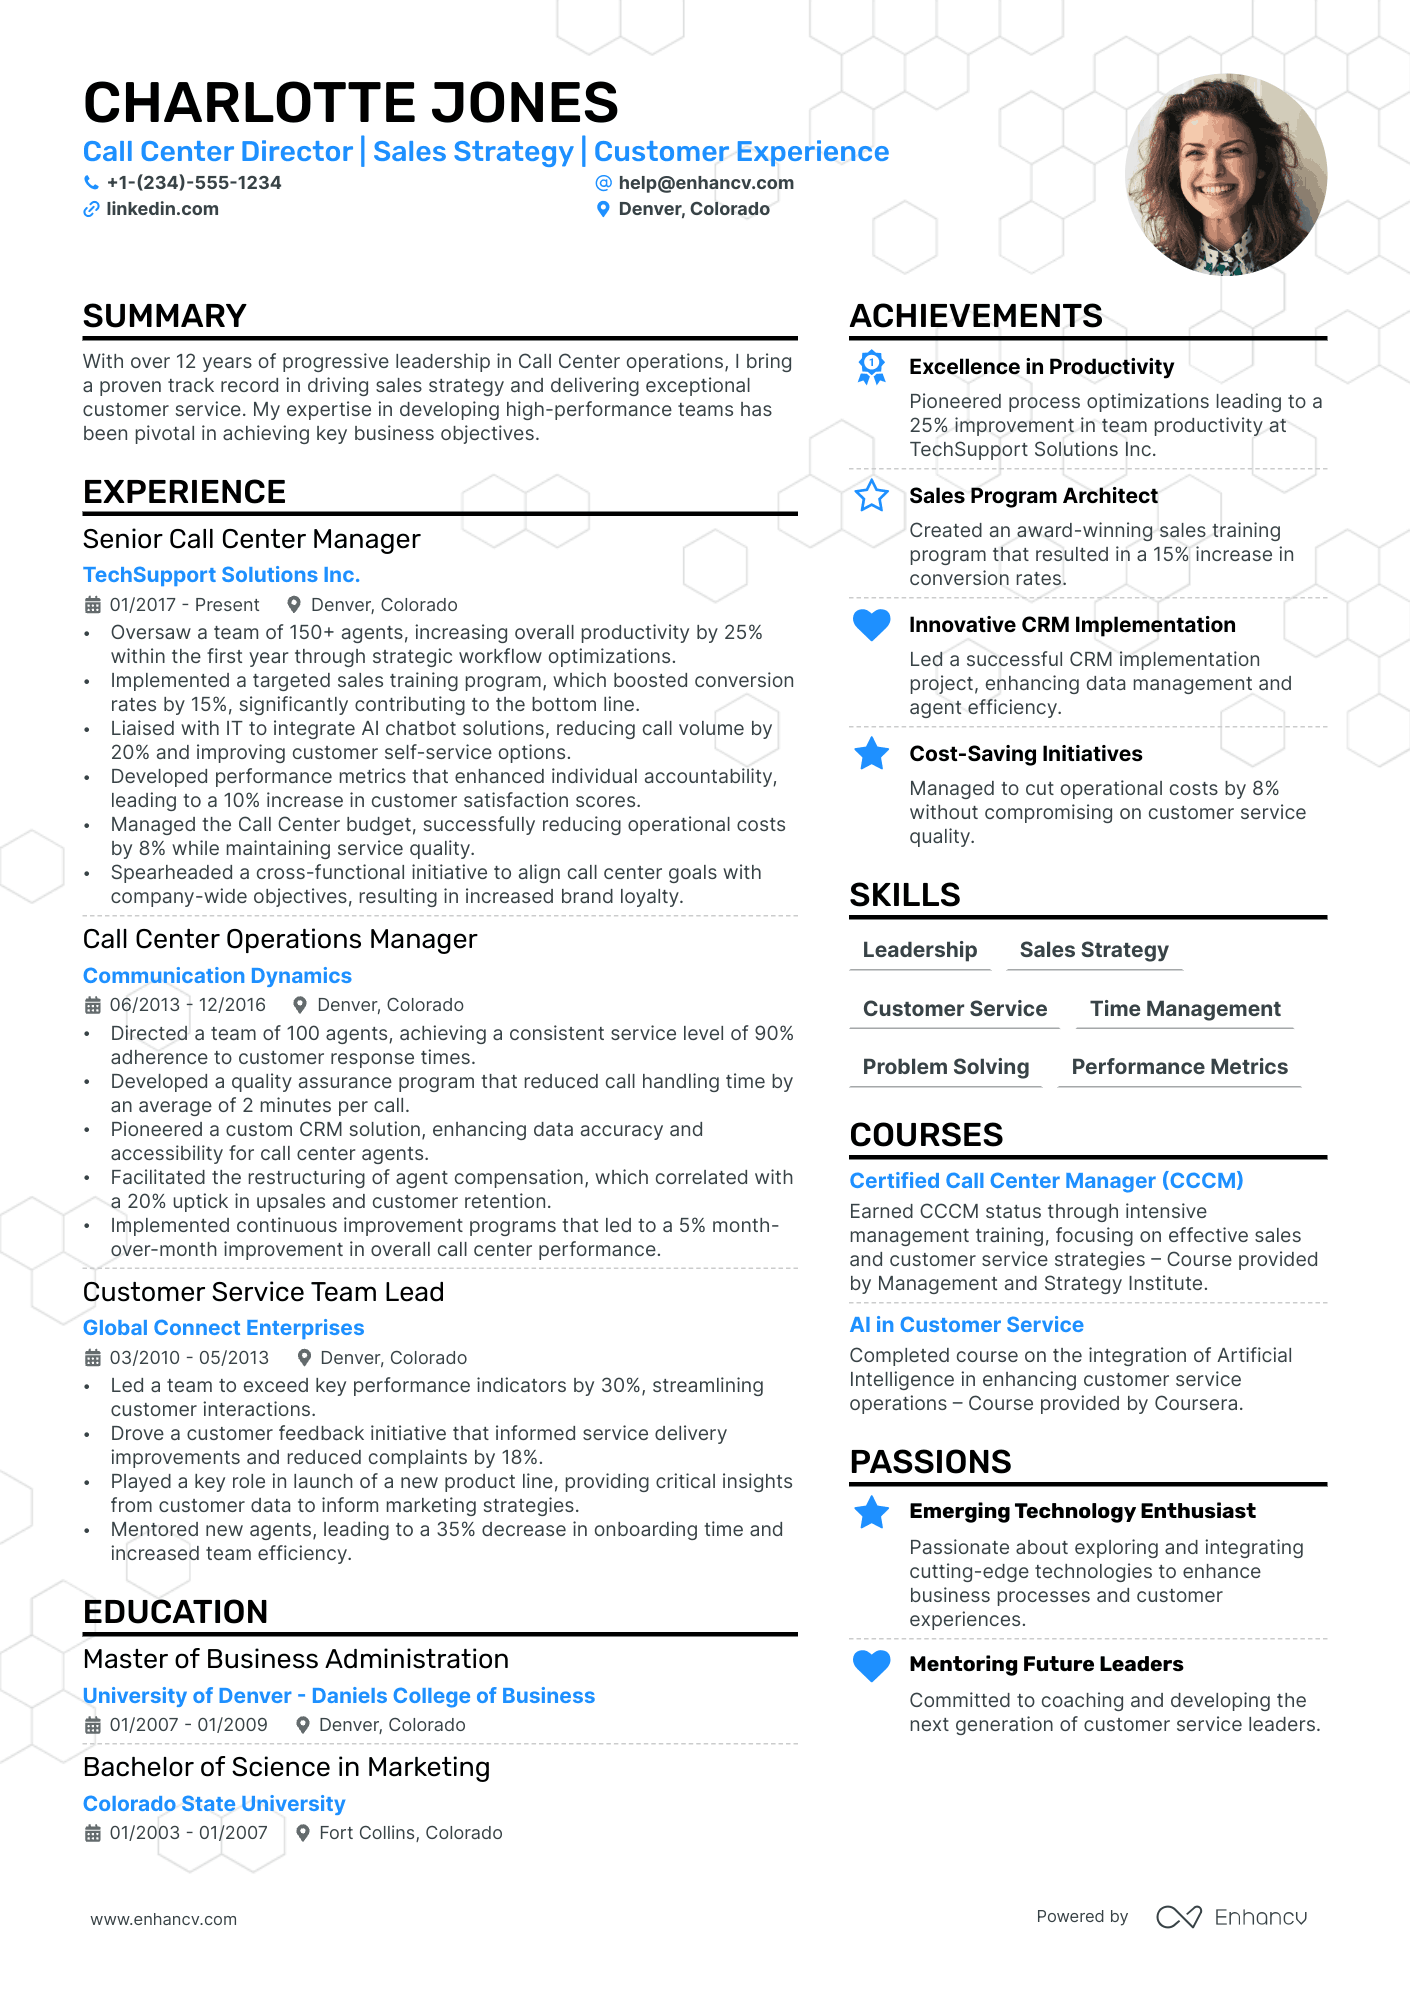 Call Center Director resume example